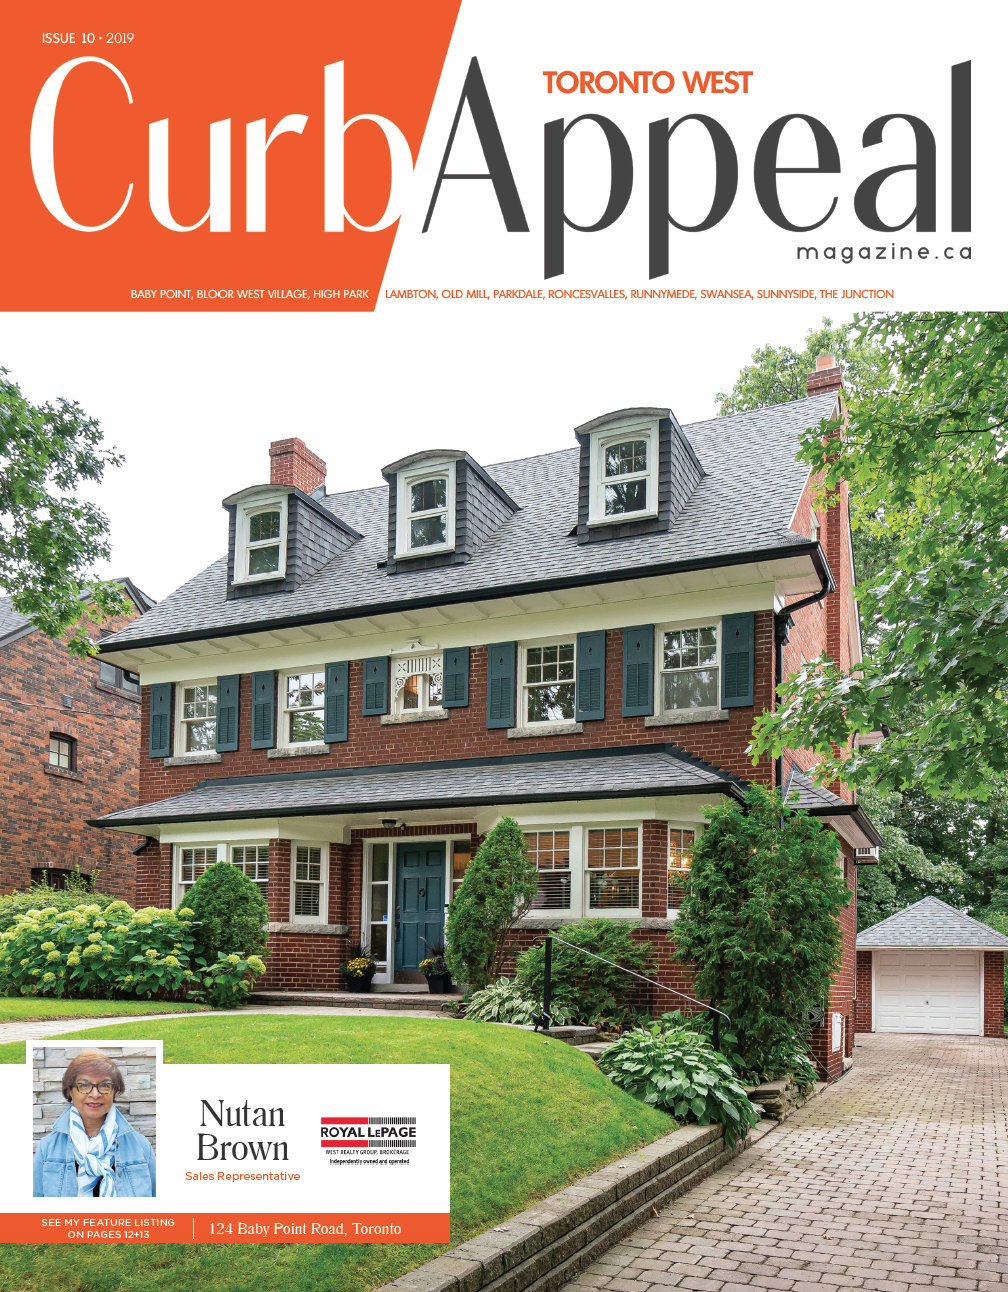 Curb Appeal Magazine - Toronto West